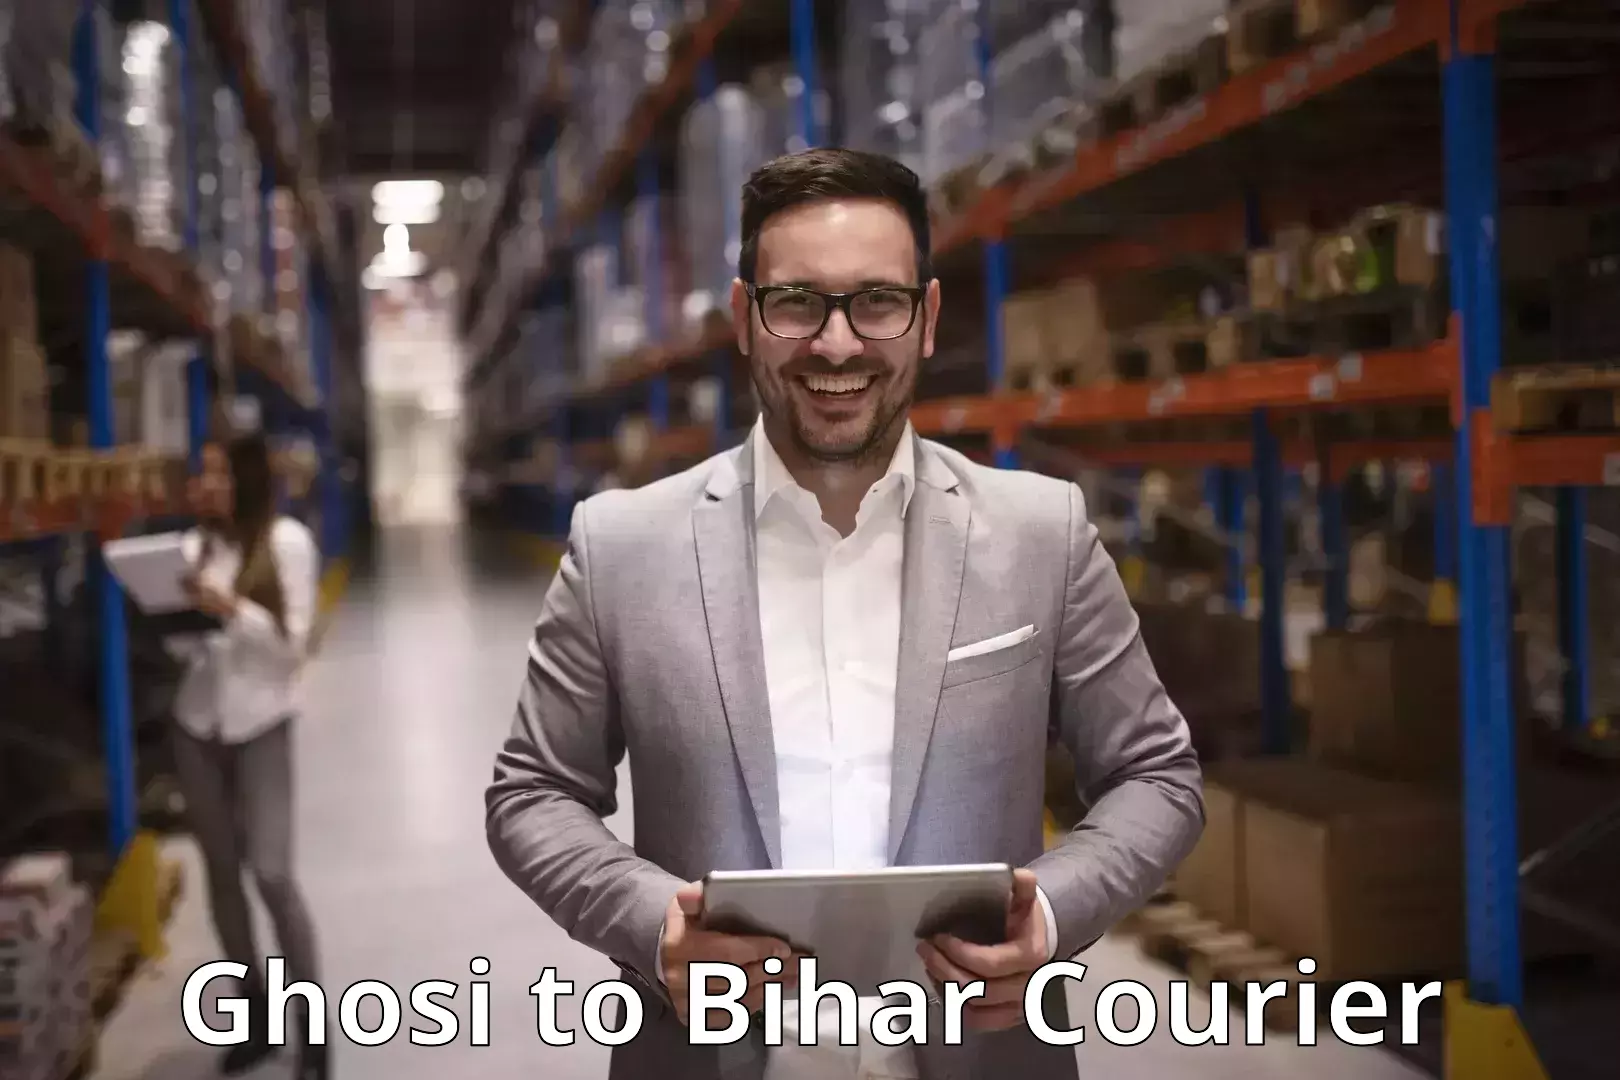 State-of-the-art courier technology Ghosi to Aurai